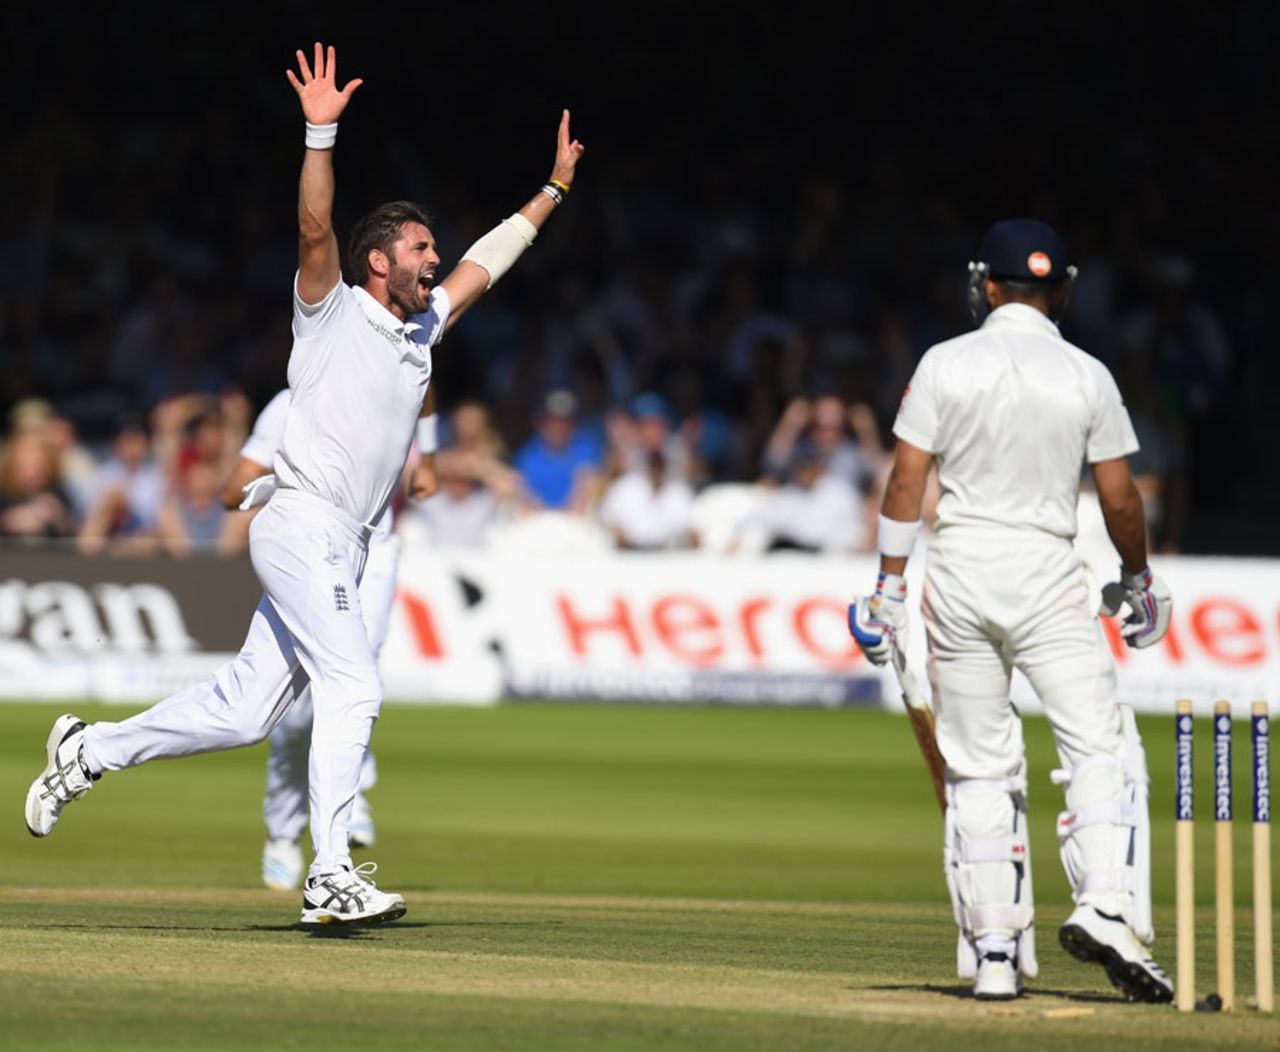 Liam Plunkett exults after bowling Virat Kohli out, England v India, 2nd Investec Test, Lord's, 3rd day, July 19, 2014